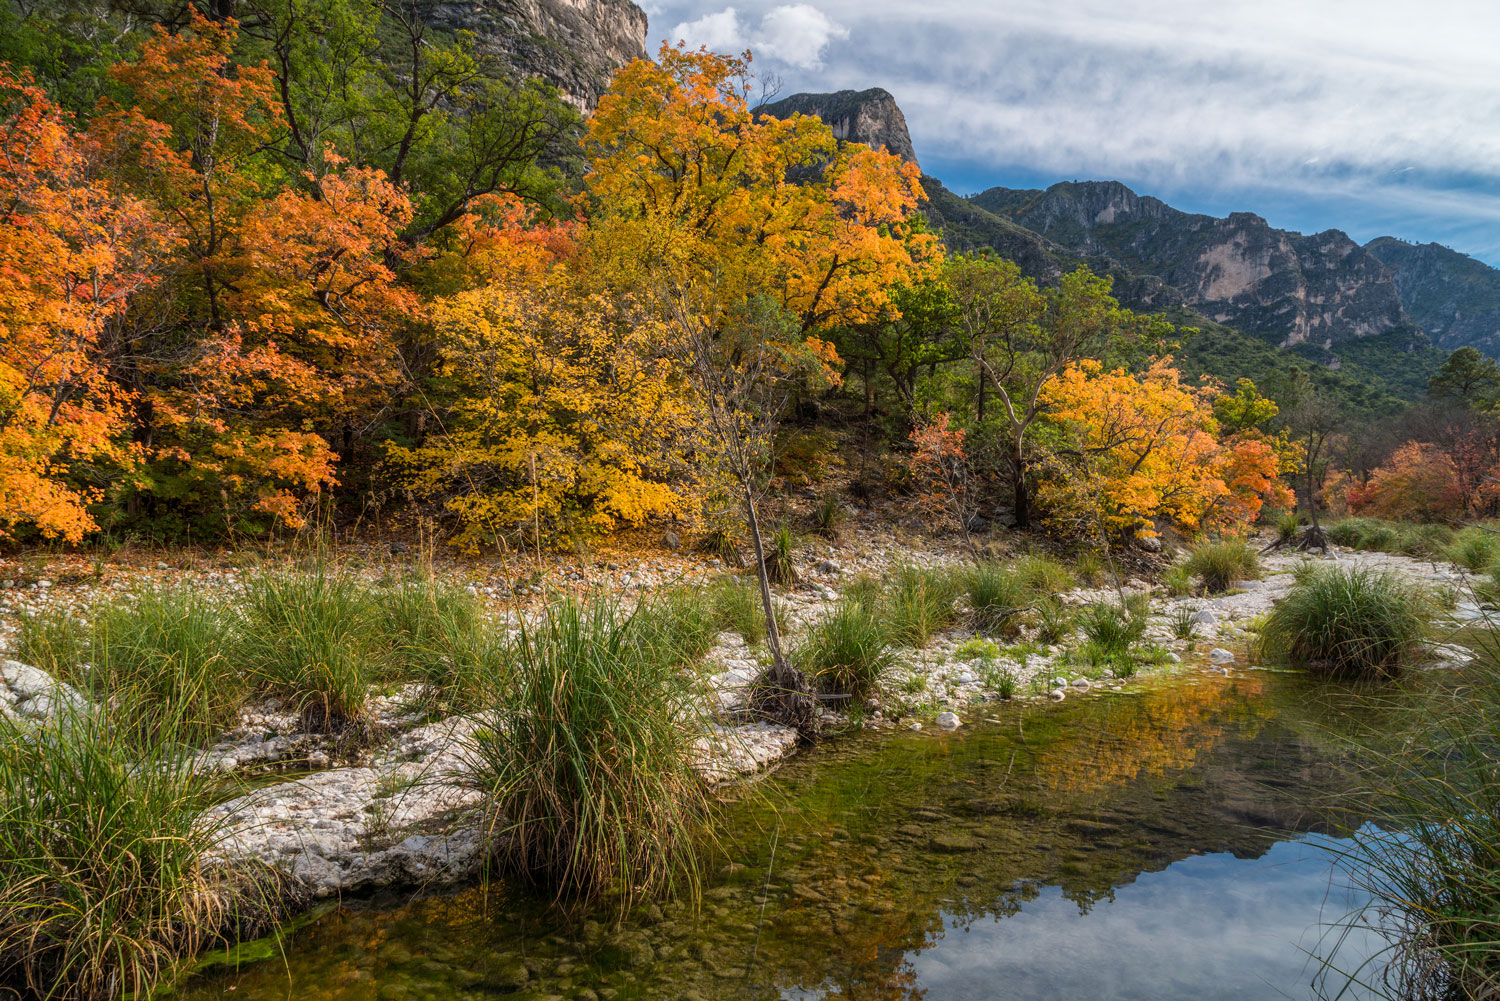 Water reflects blue skies and clouds next to white rocks and green grasses. Yellow-orange leaves of trees rise behind it under rocky peaks and blue skies with white clouds.